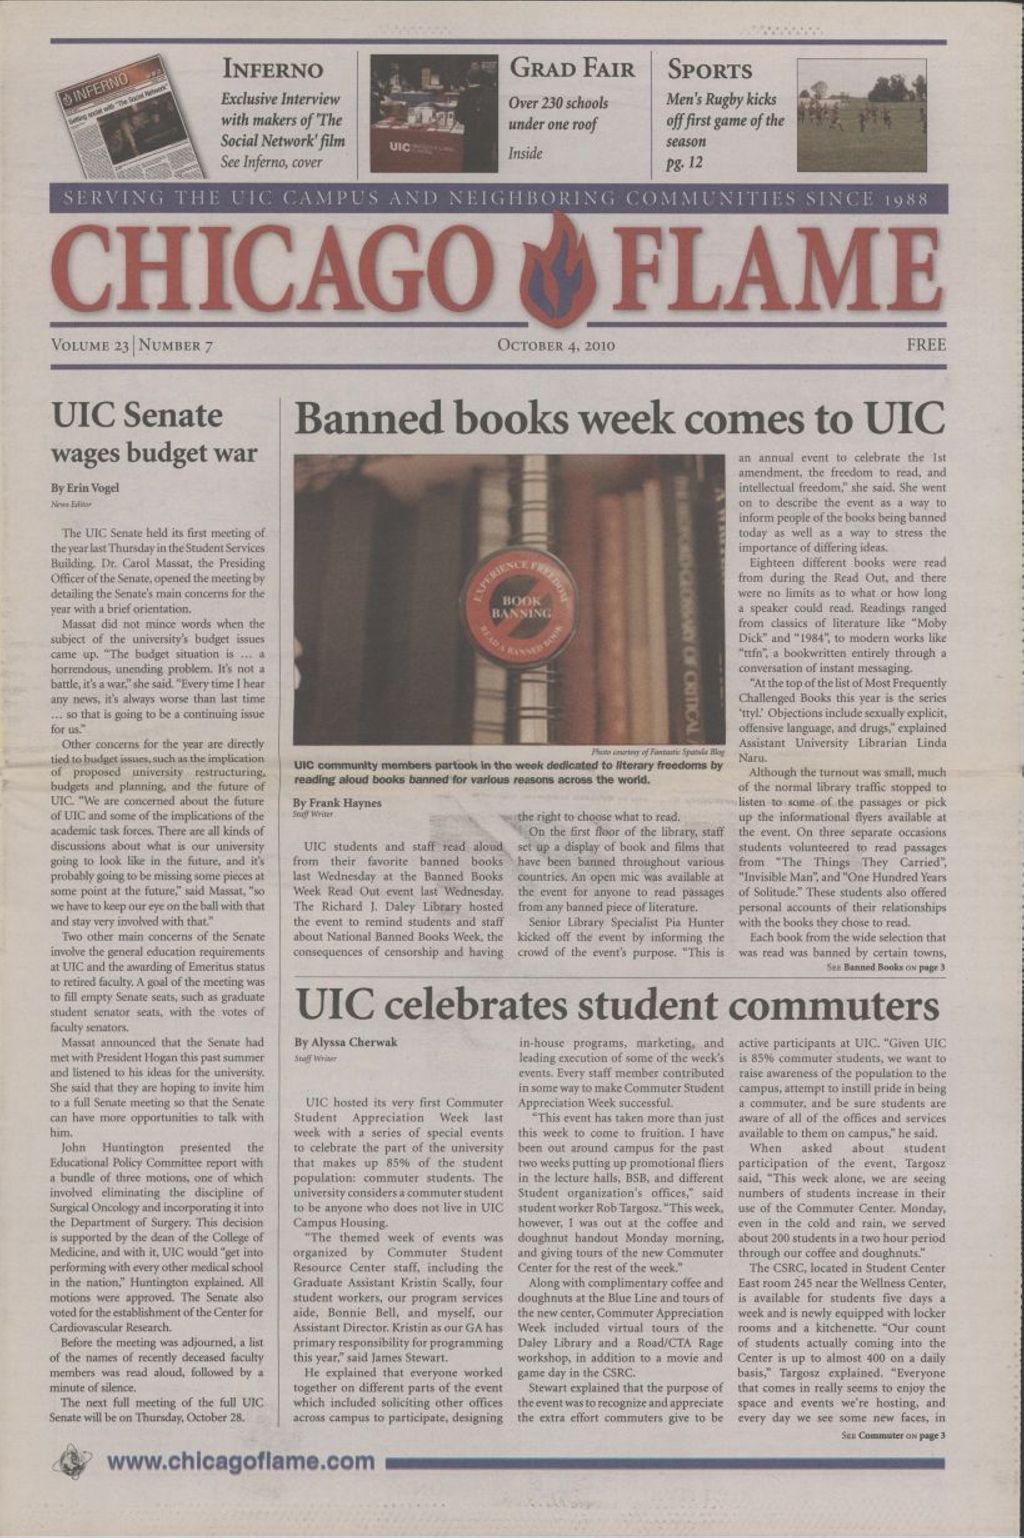 Miniature of Chicago Flame (October 4, 2010)